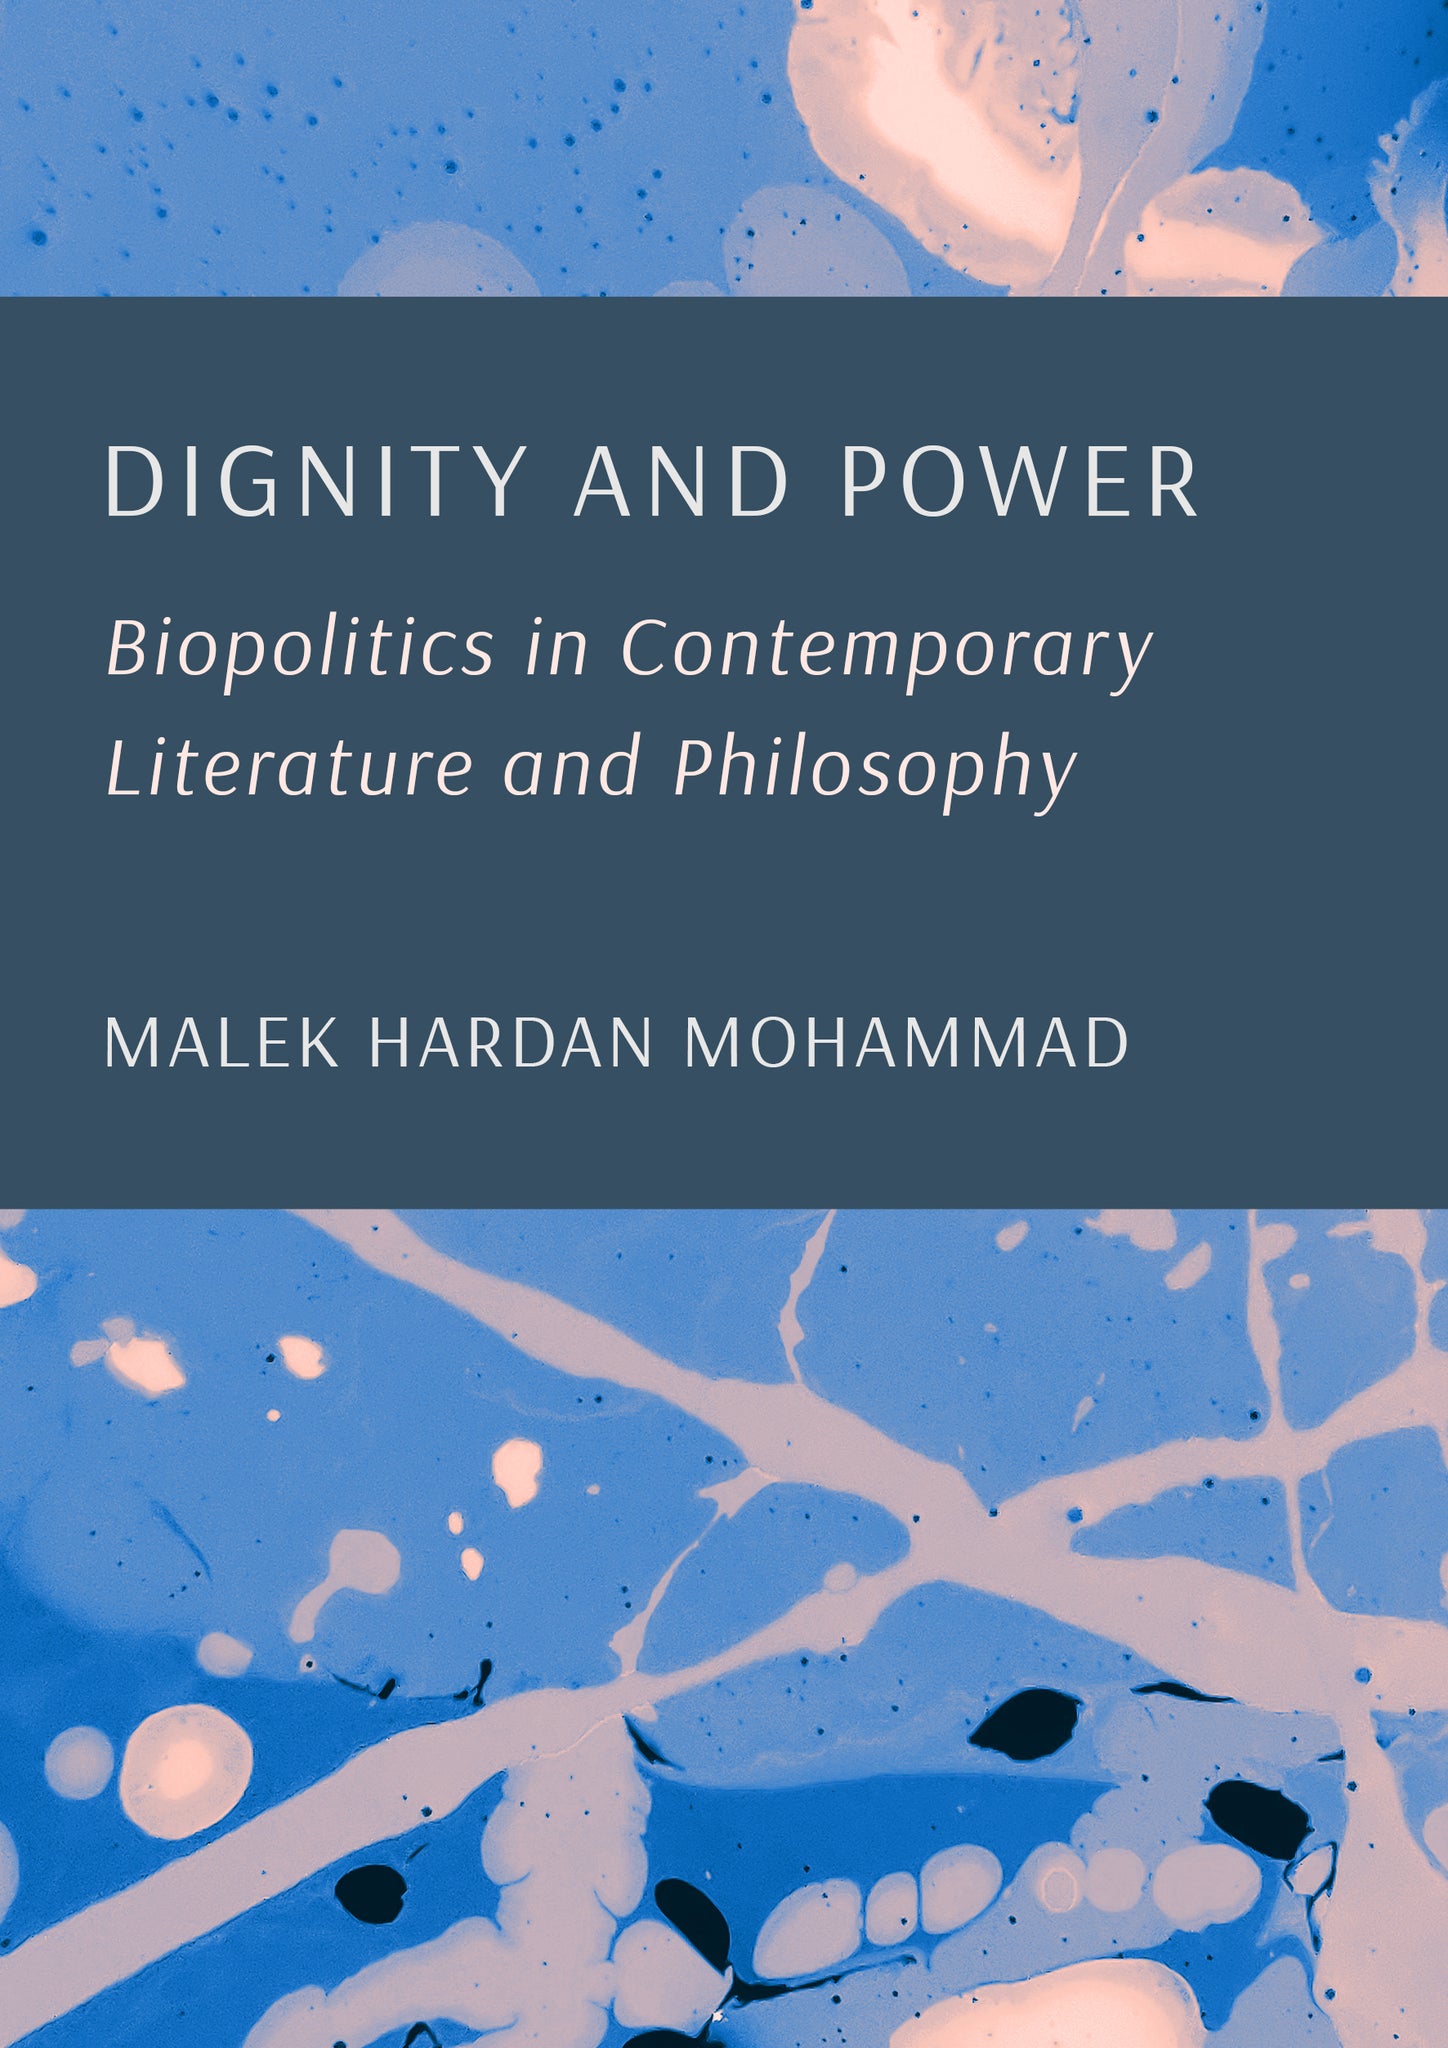 Dignity and Power: Biopolitics in Contemporary Literature and Philosophy